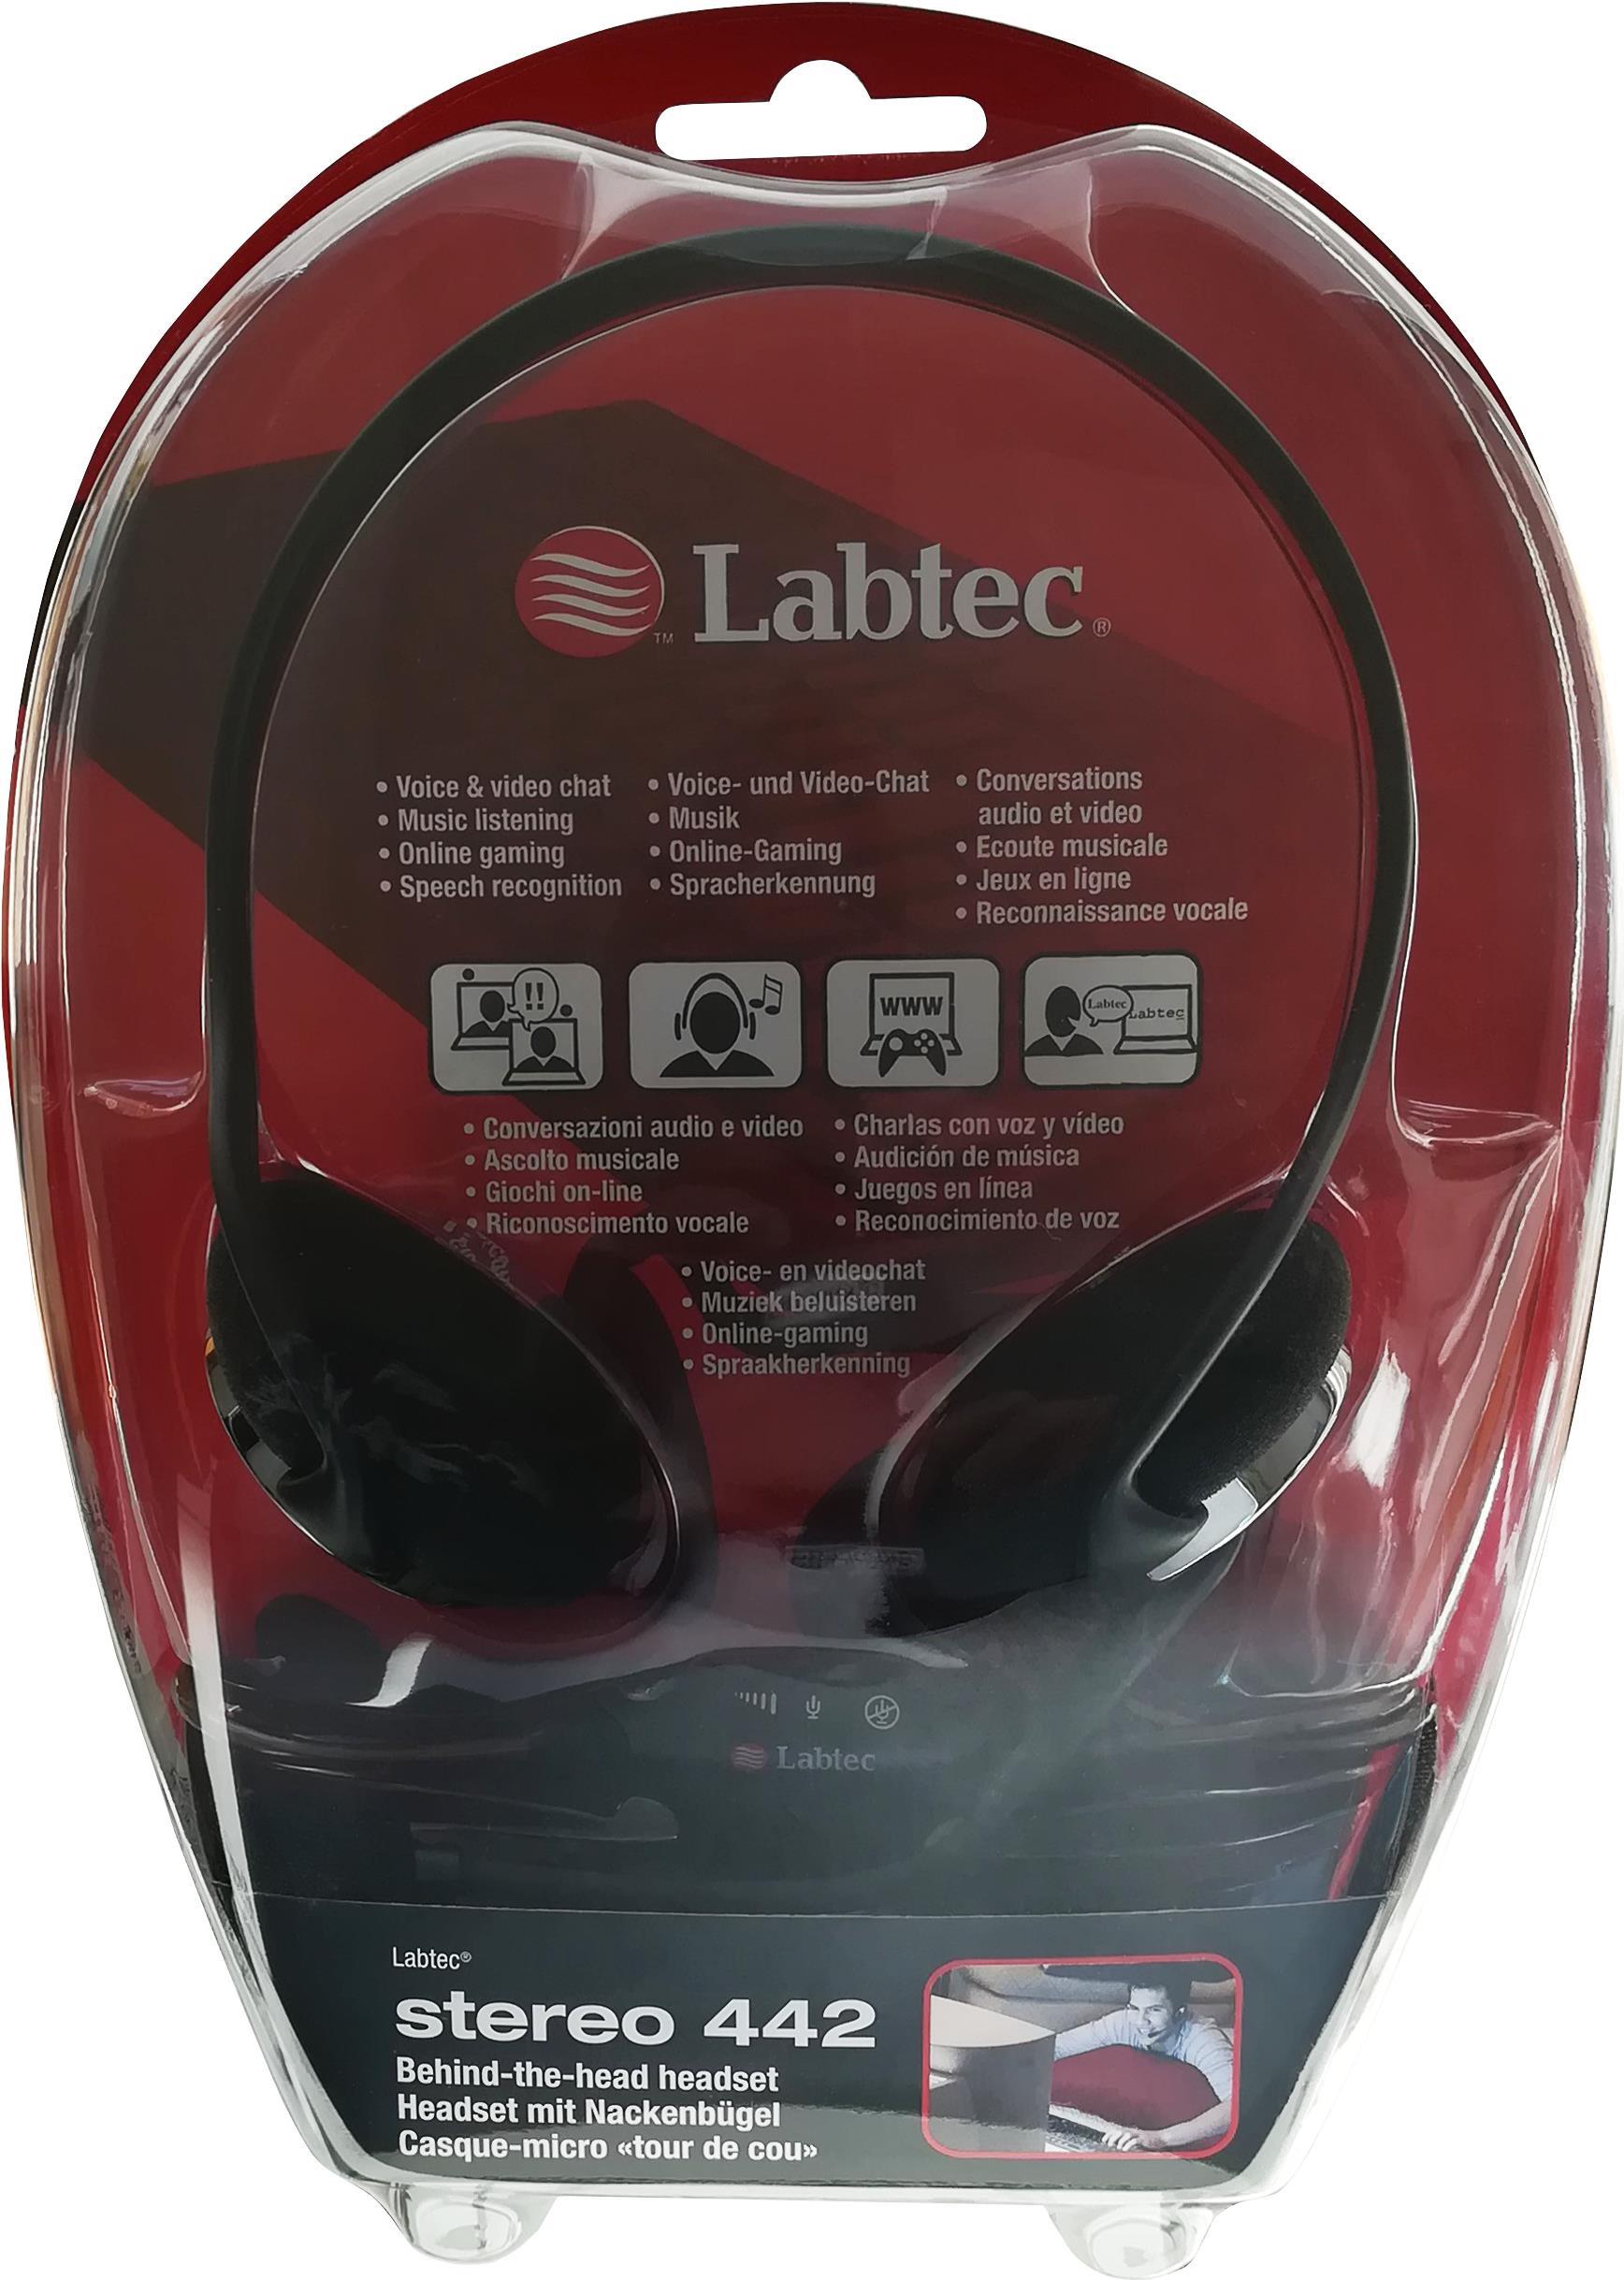 Labtec Stereo 442 Headset (981-000083)